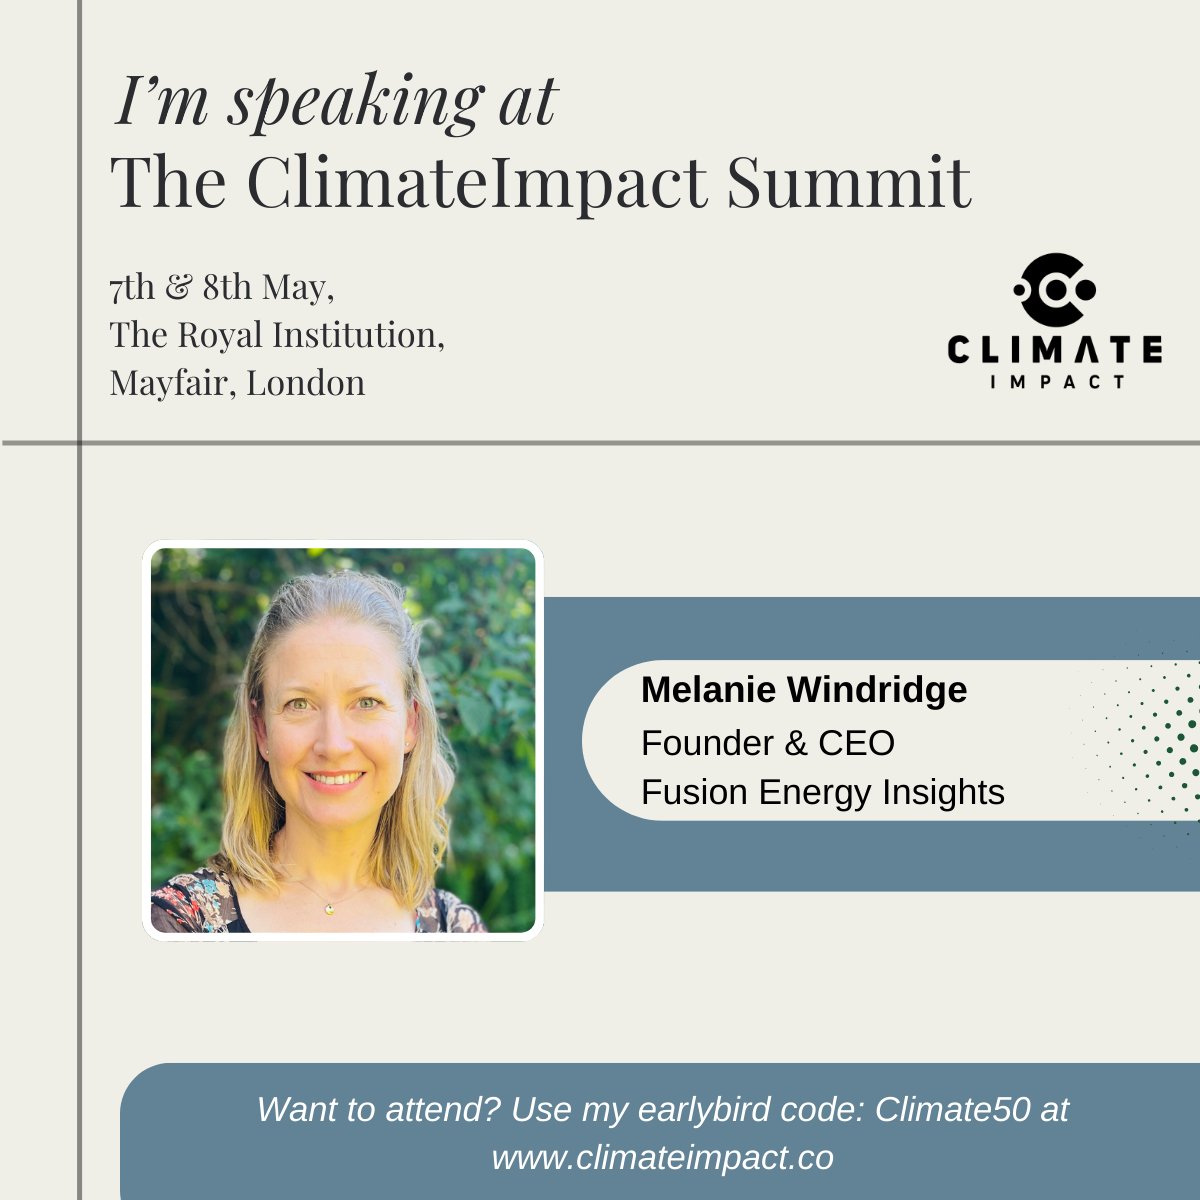 Next week, Fusion Energy Insights' @m_windridge will be interviewing @FLF_Nick of @FLFusion Light Fusion at the #ClimateImpact Summit in London. Find out more here - lnkd.in/e8D9hWts @Ri_Science #ClimateChange